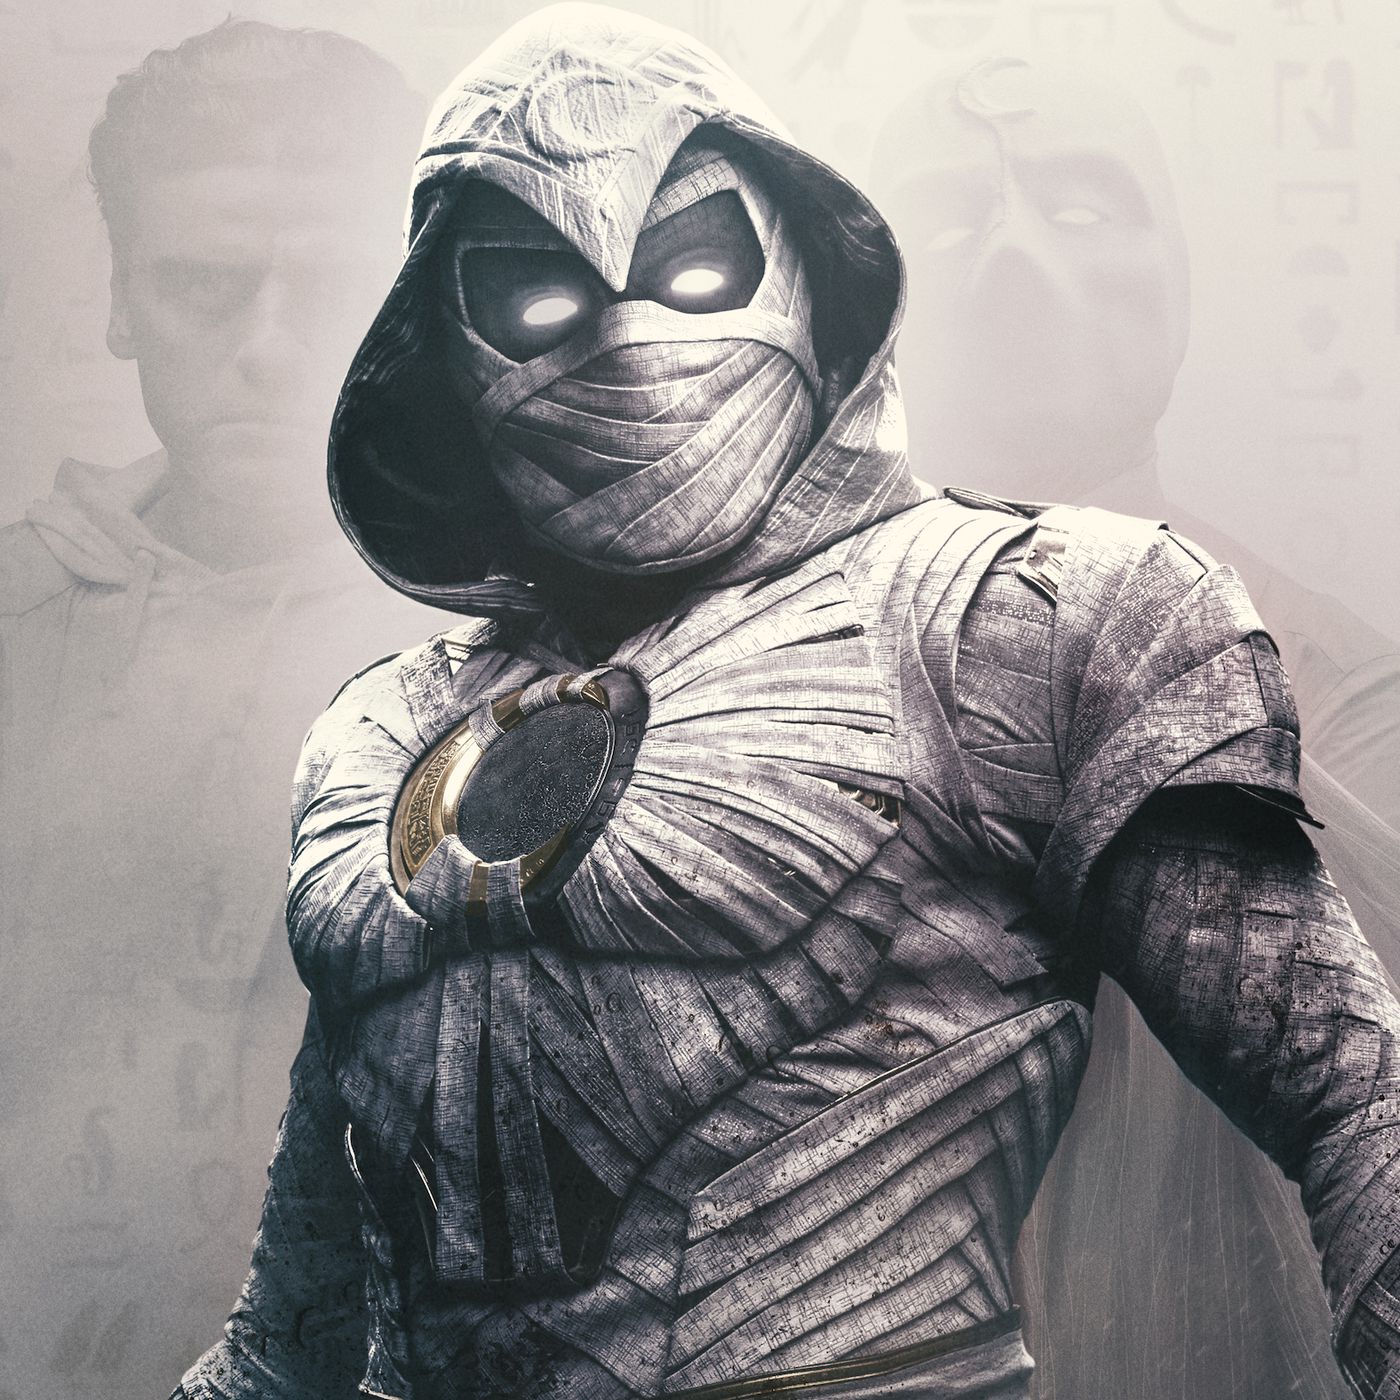 Moon Knight review: the return of Marvel's resurrection machine